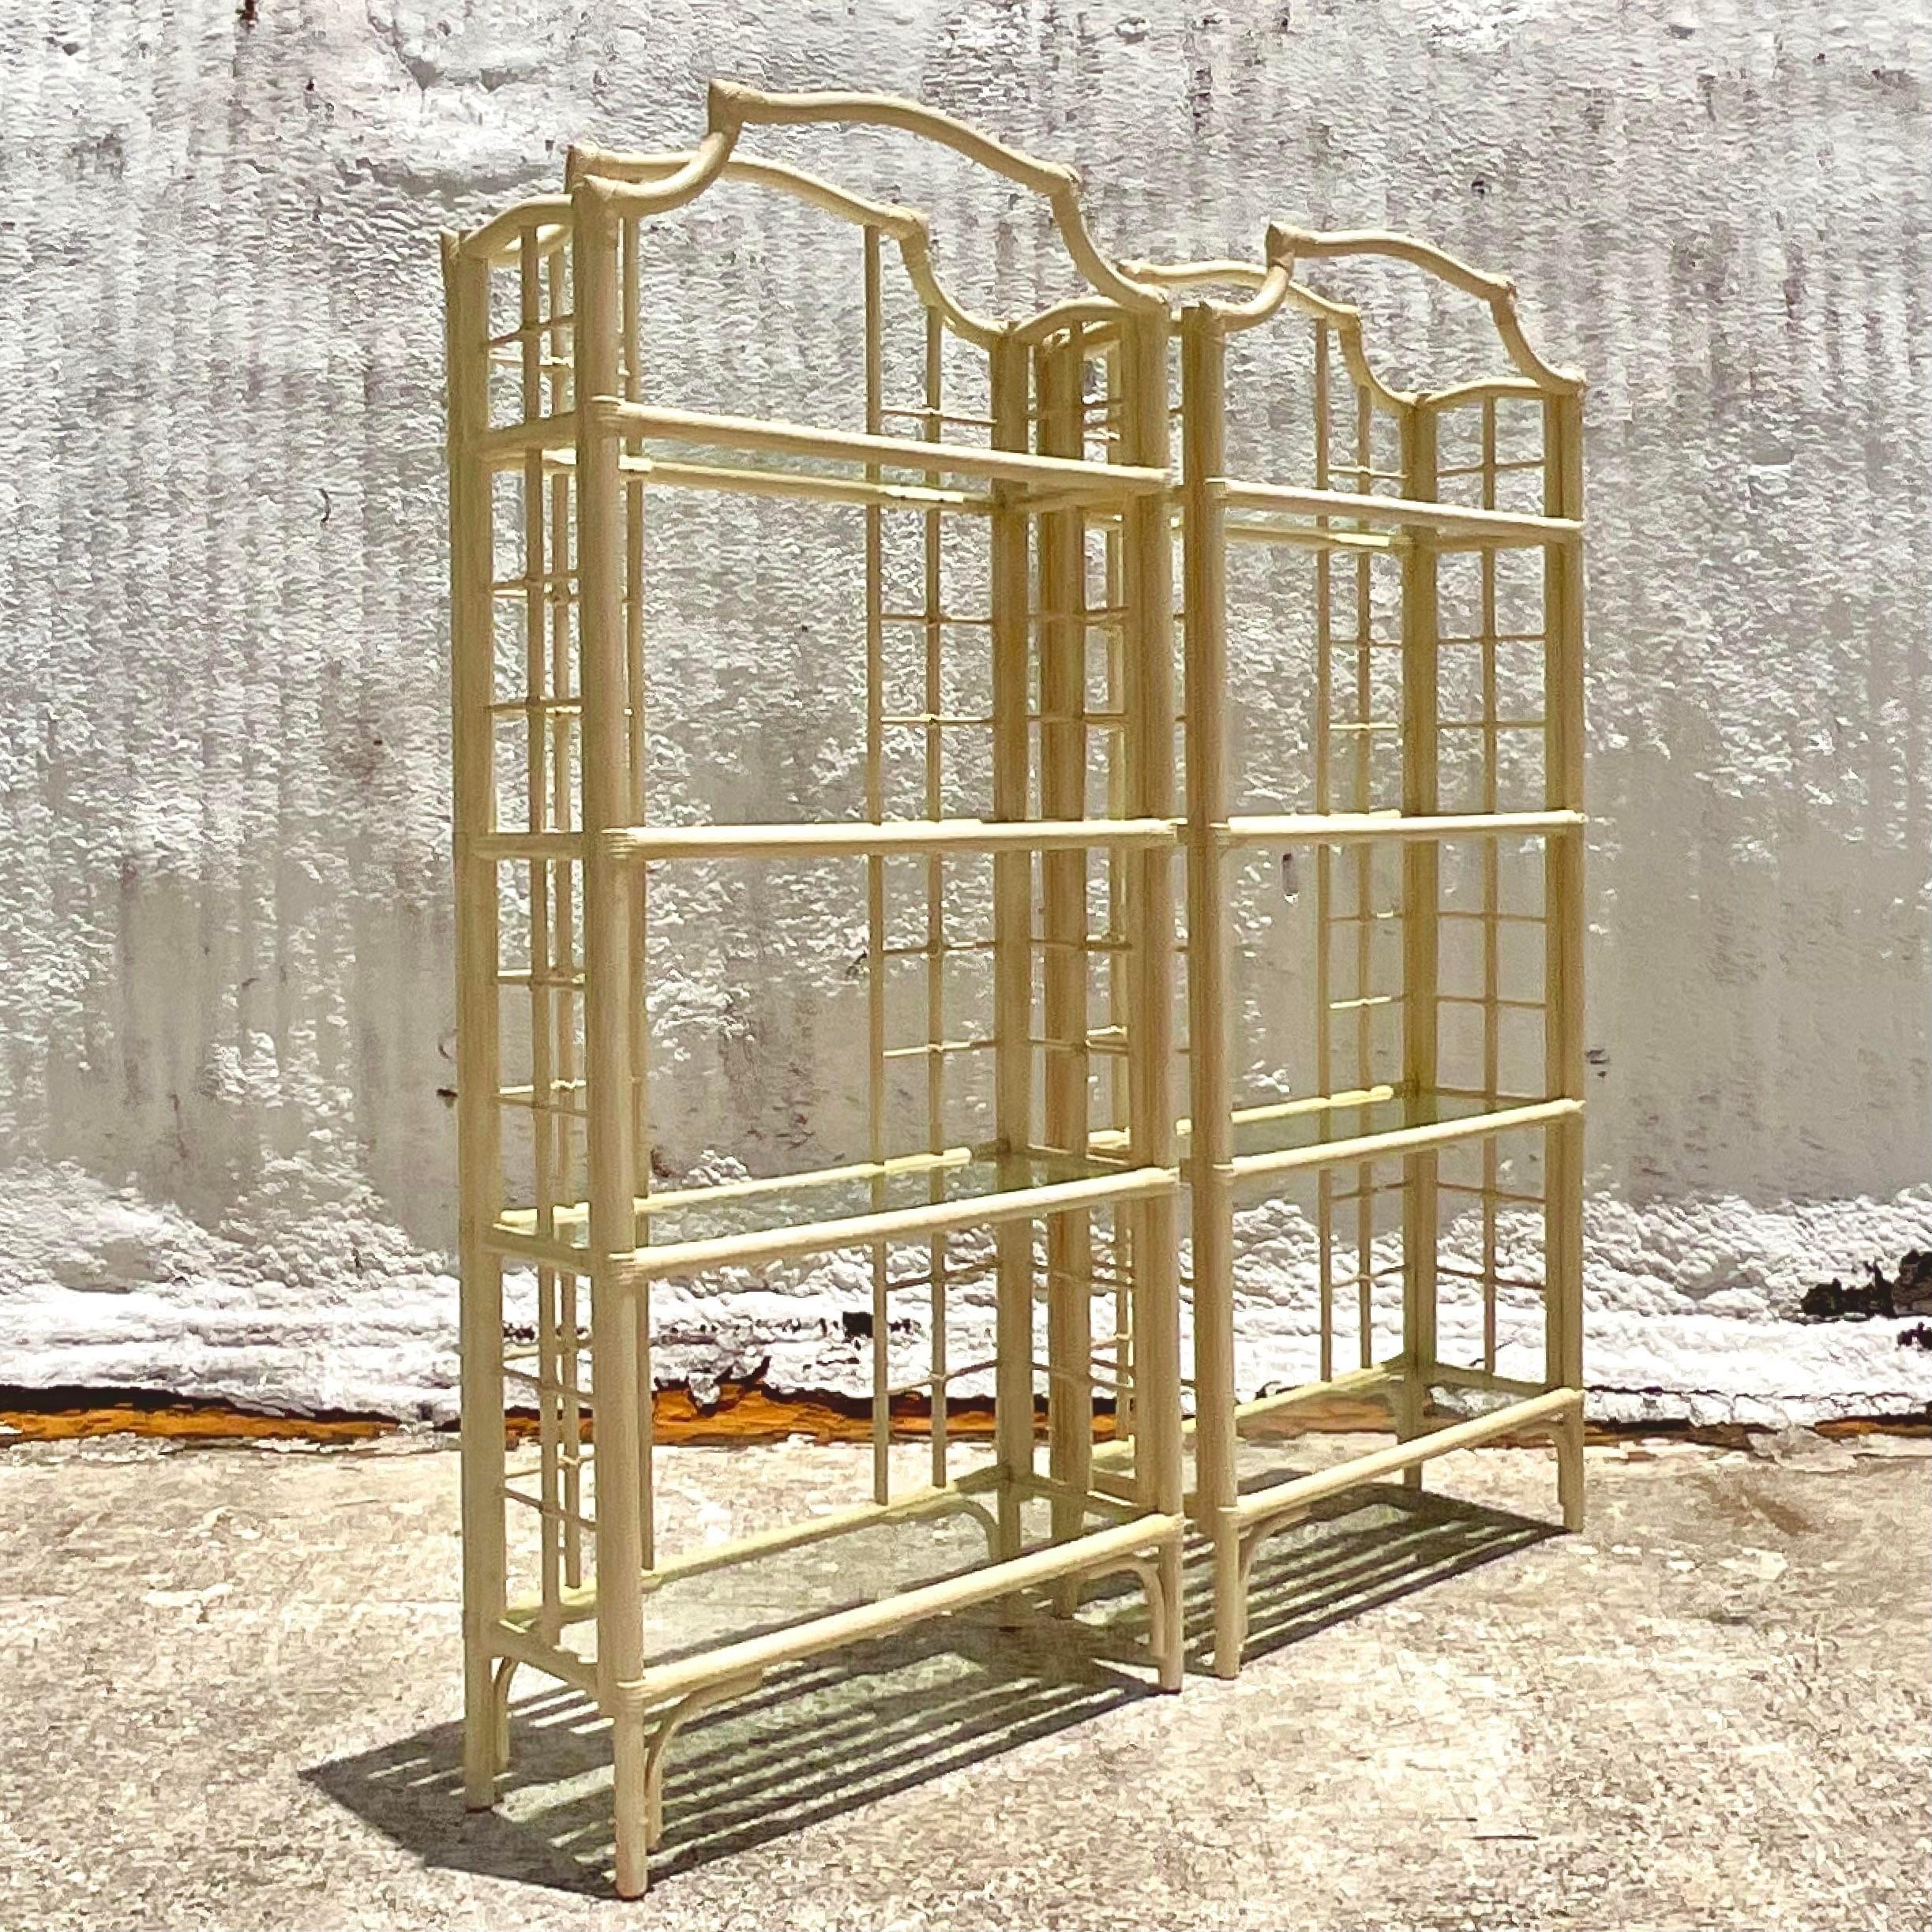 A fabulous pair of vintage Coastal etagere. Beautiful notched top design in a pale yellow finish. Perfect as is or paint to suit your project. You decide! Inset glass shelved. Acquired from a Palm Beach estate.